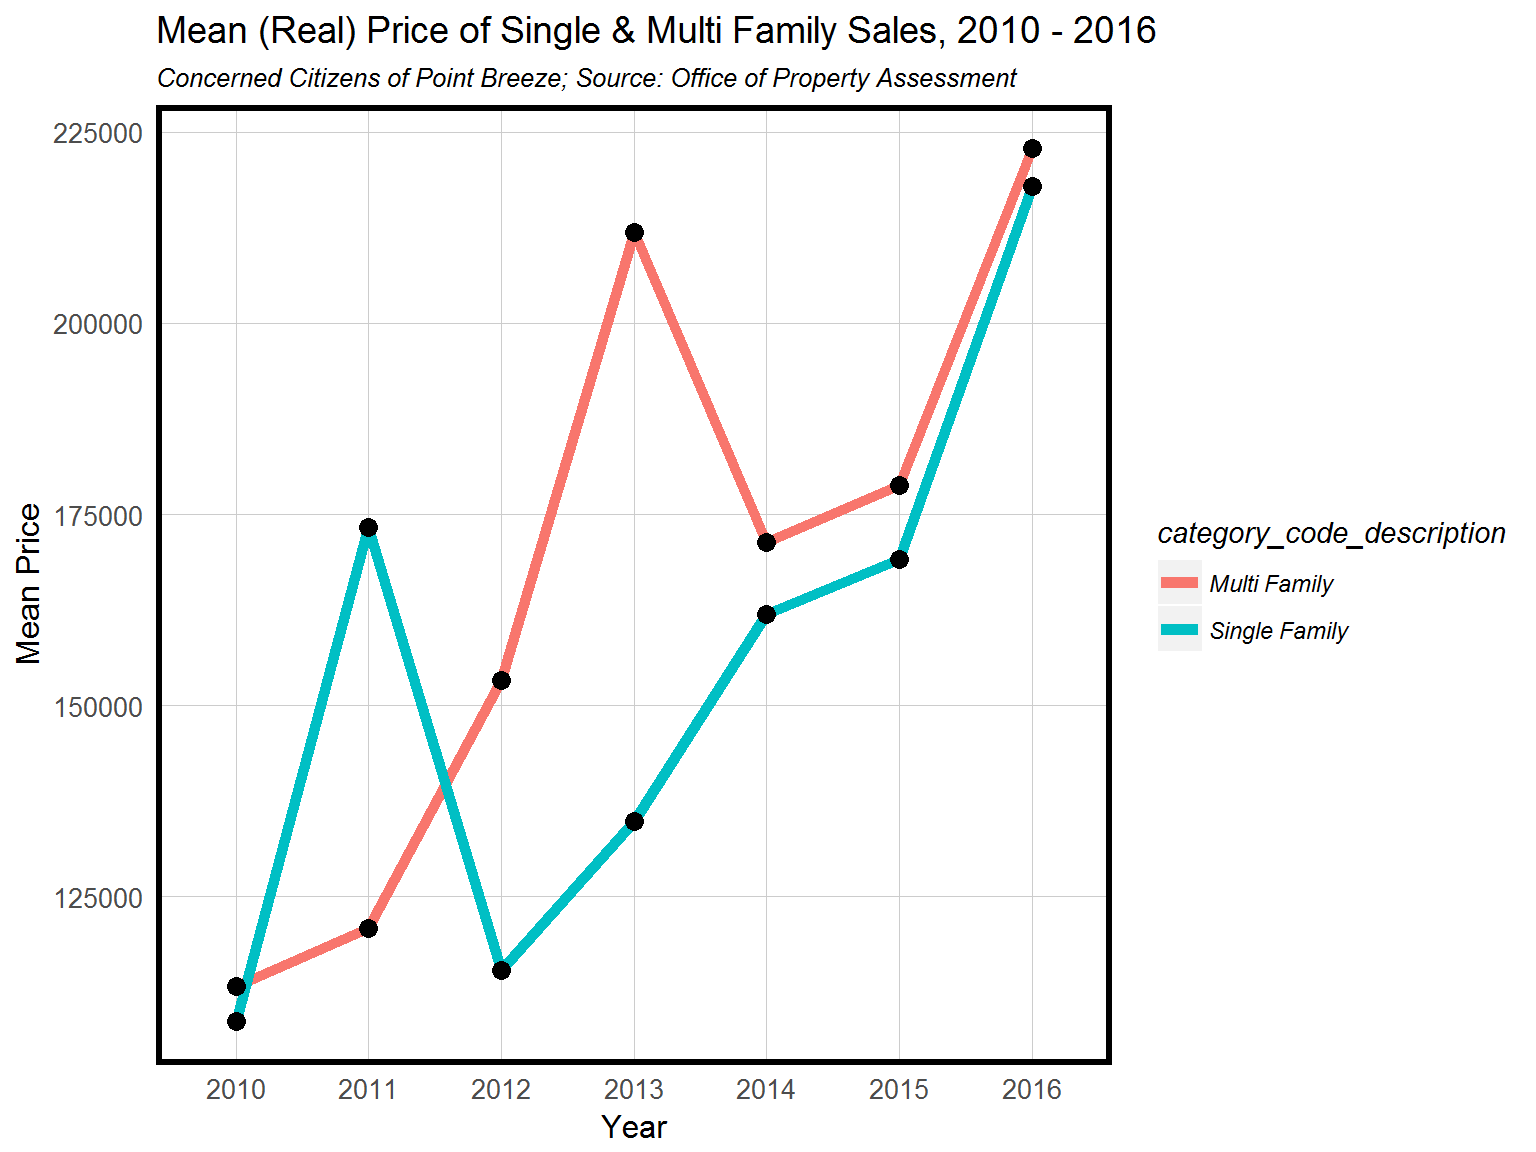 Mean (real) price of single and multi family sales in Point Breeze, 2010-2016. Credit: Ken Steif